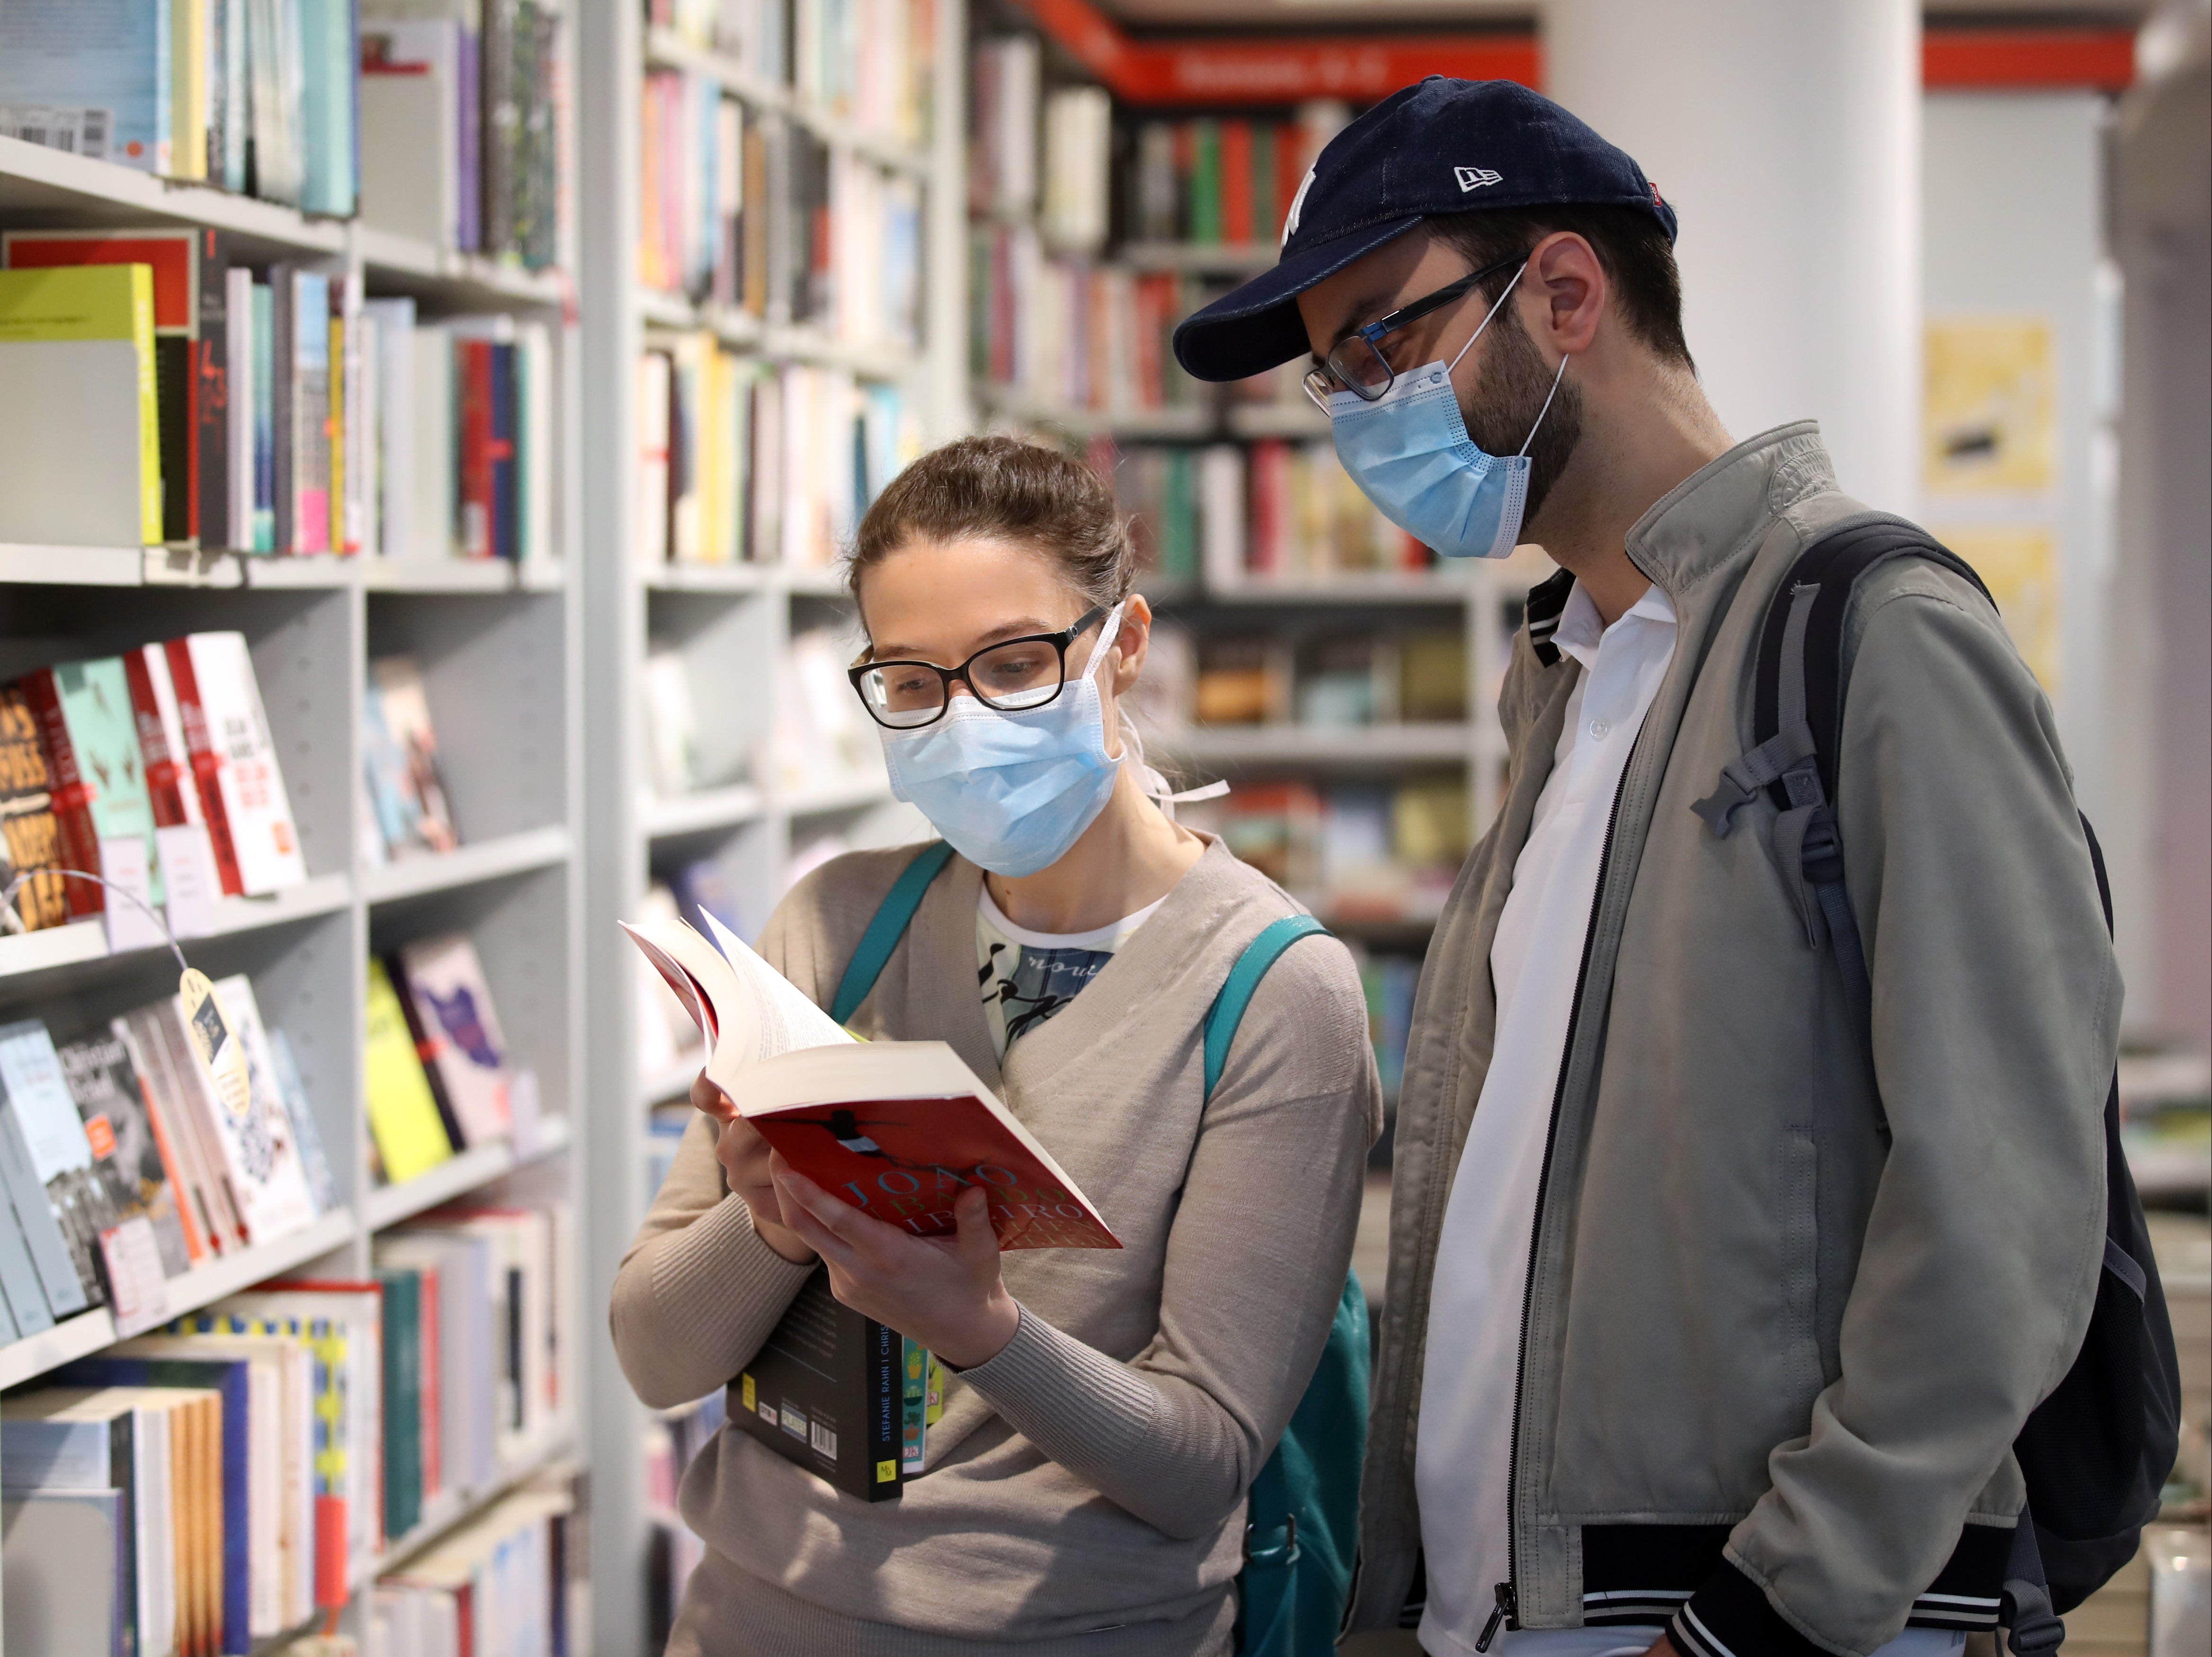 The past year has seen an uptick in reading driven by the pandemic